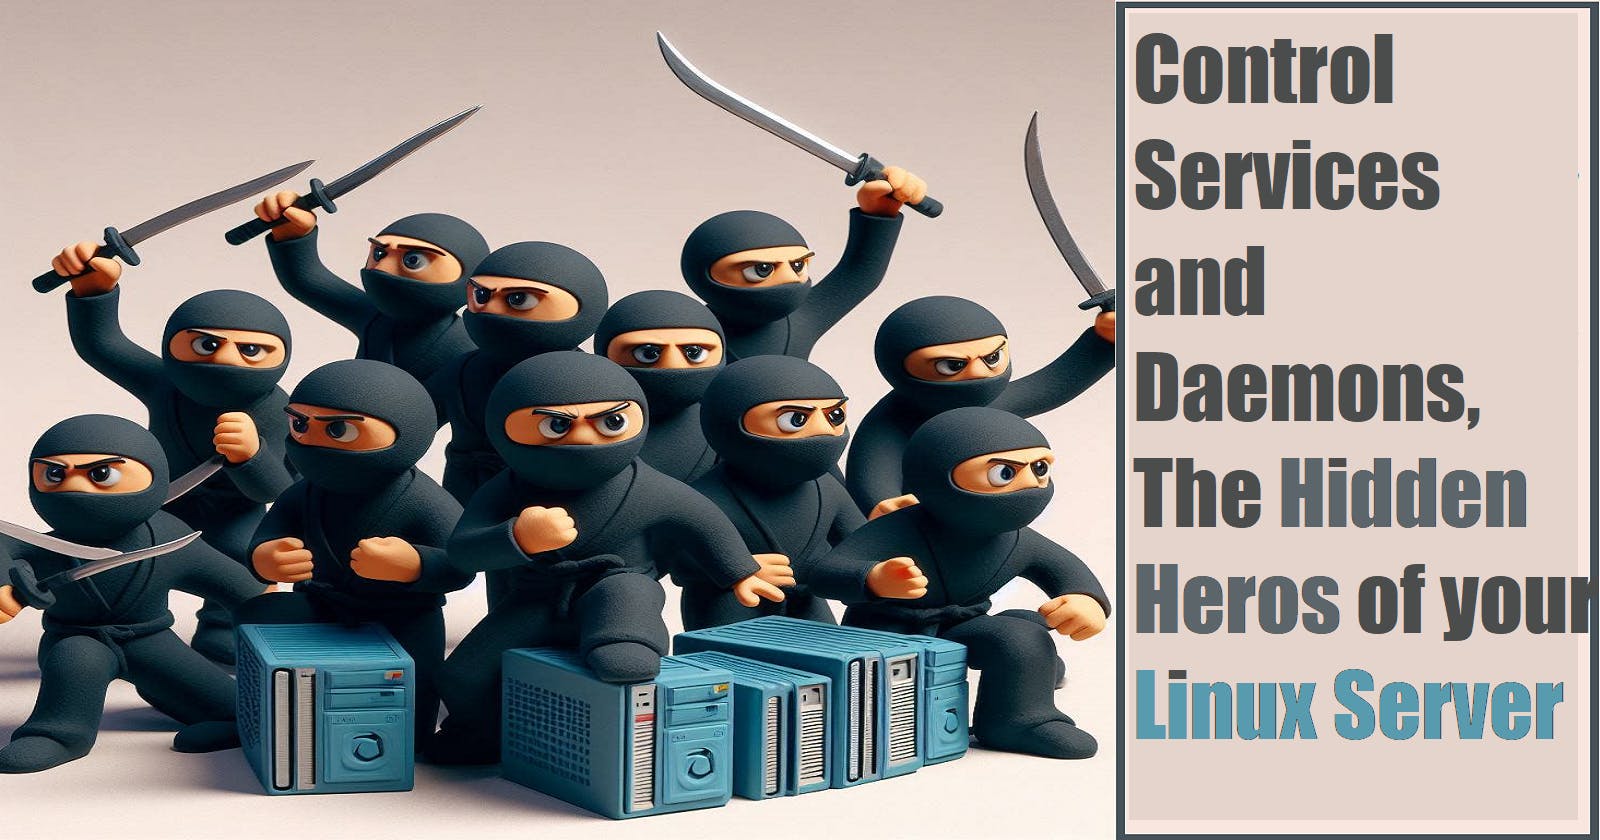 Linux Services & Daemons: The Hidden Hero's of your Linux Server